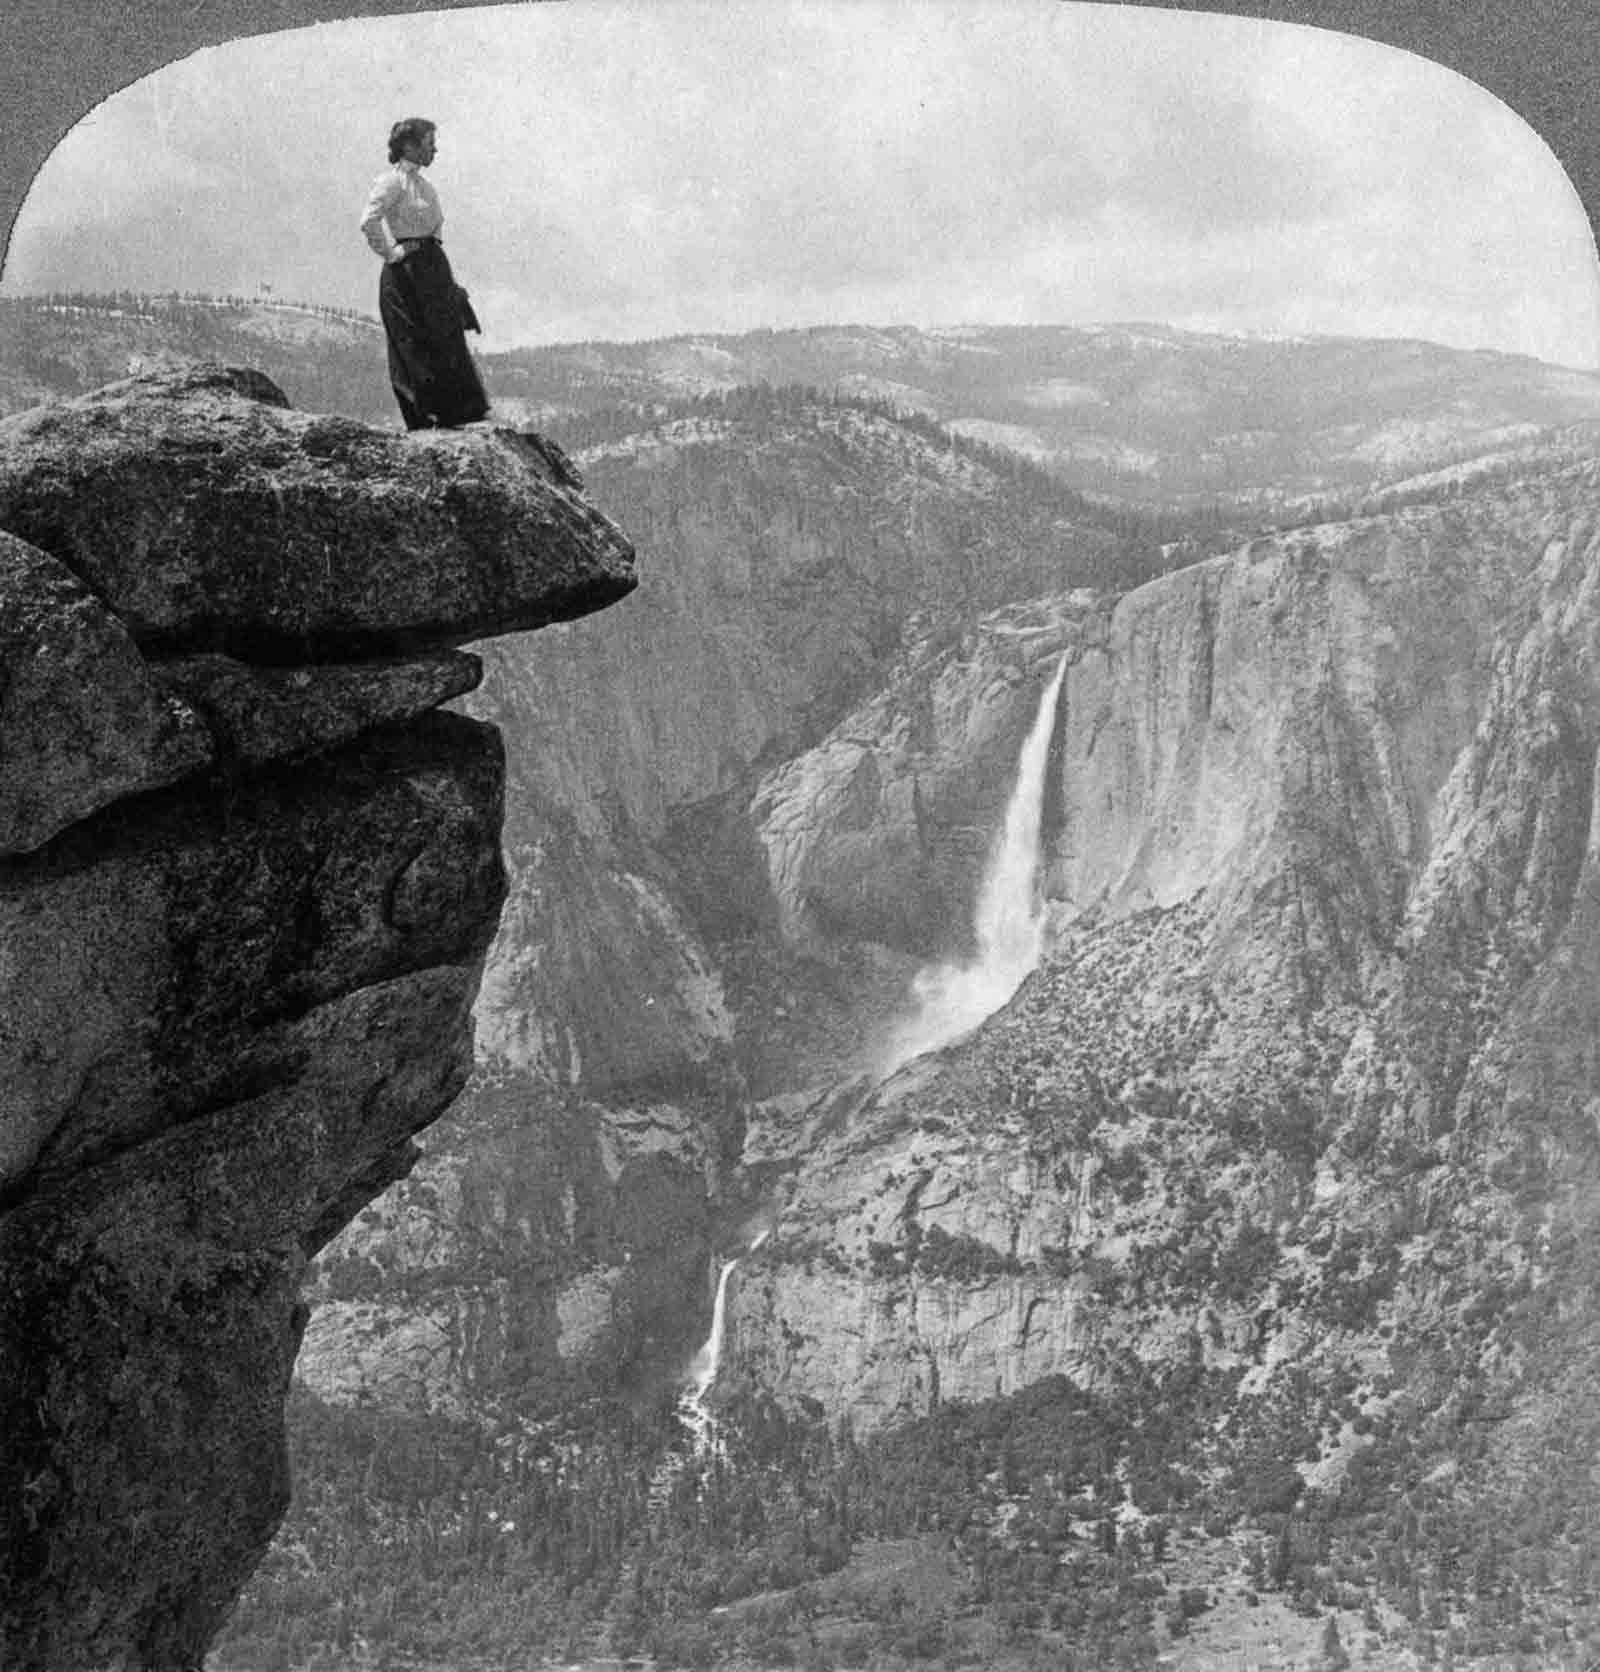 A tourist stands on Glacier Point with Yosemite Falls in the background, 1902.